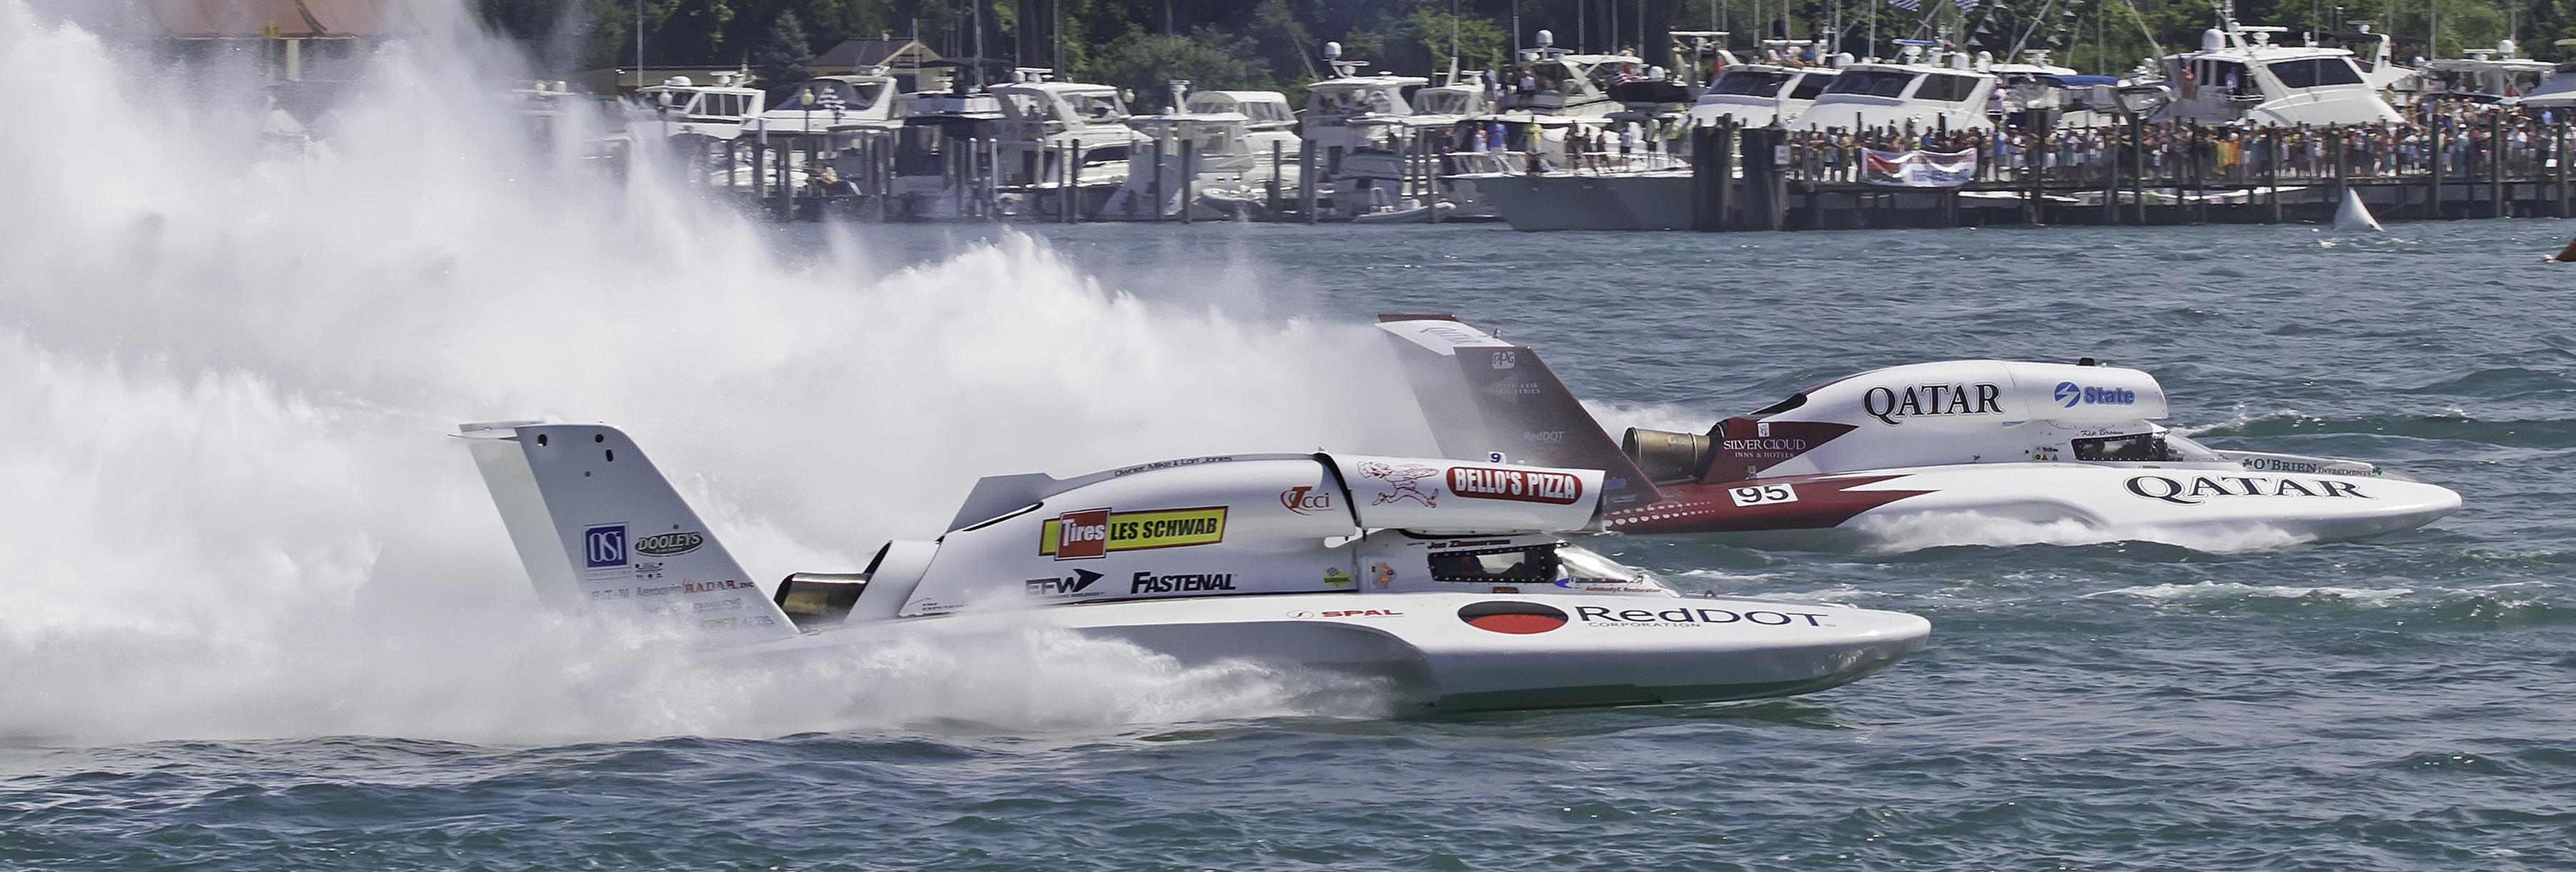 Jon Zimmerman (L) and Kip Brown (R) race for the lead in the Gold Cup final heat. Photo by Chris Denslow – H1